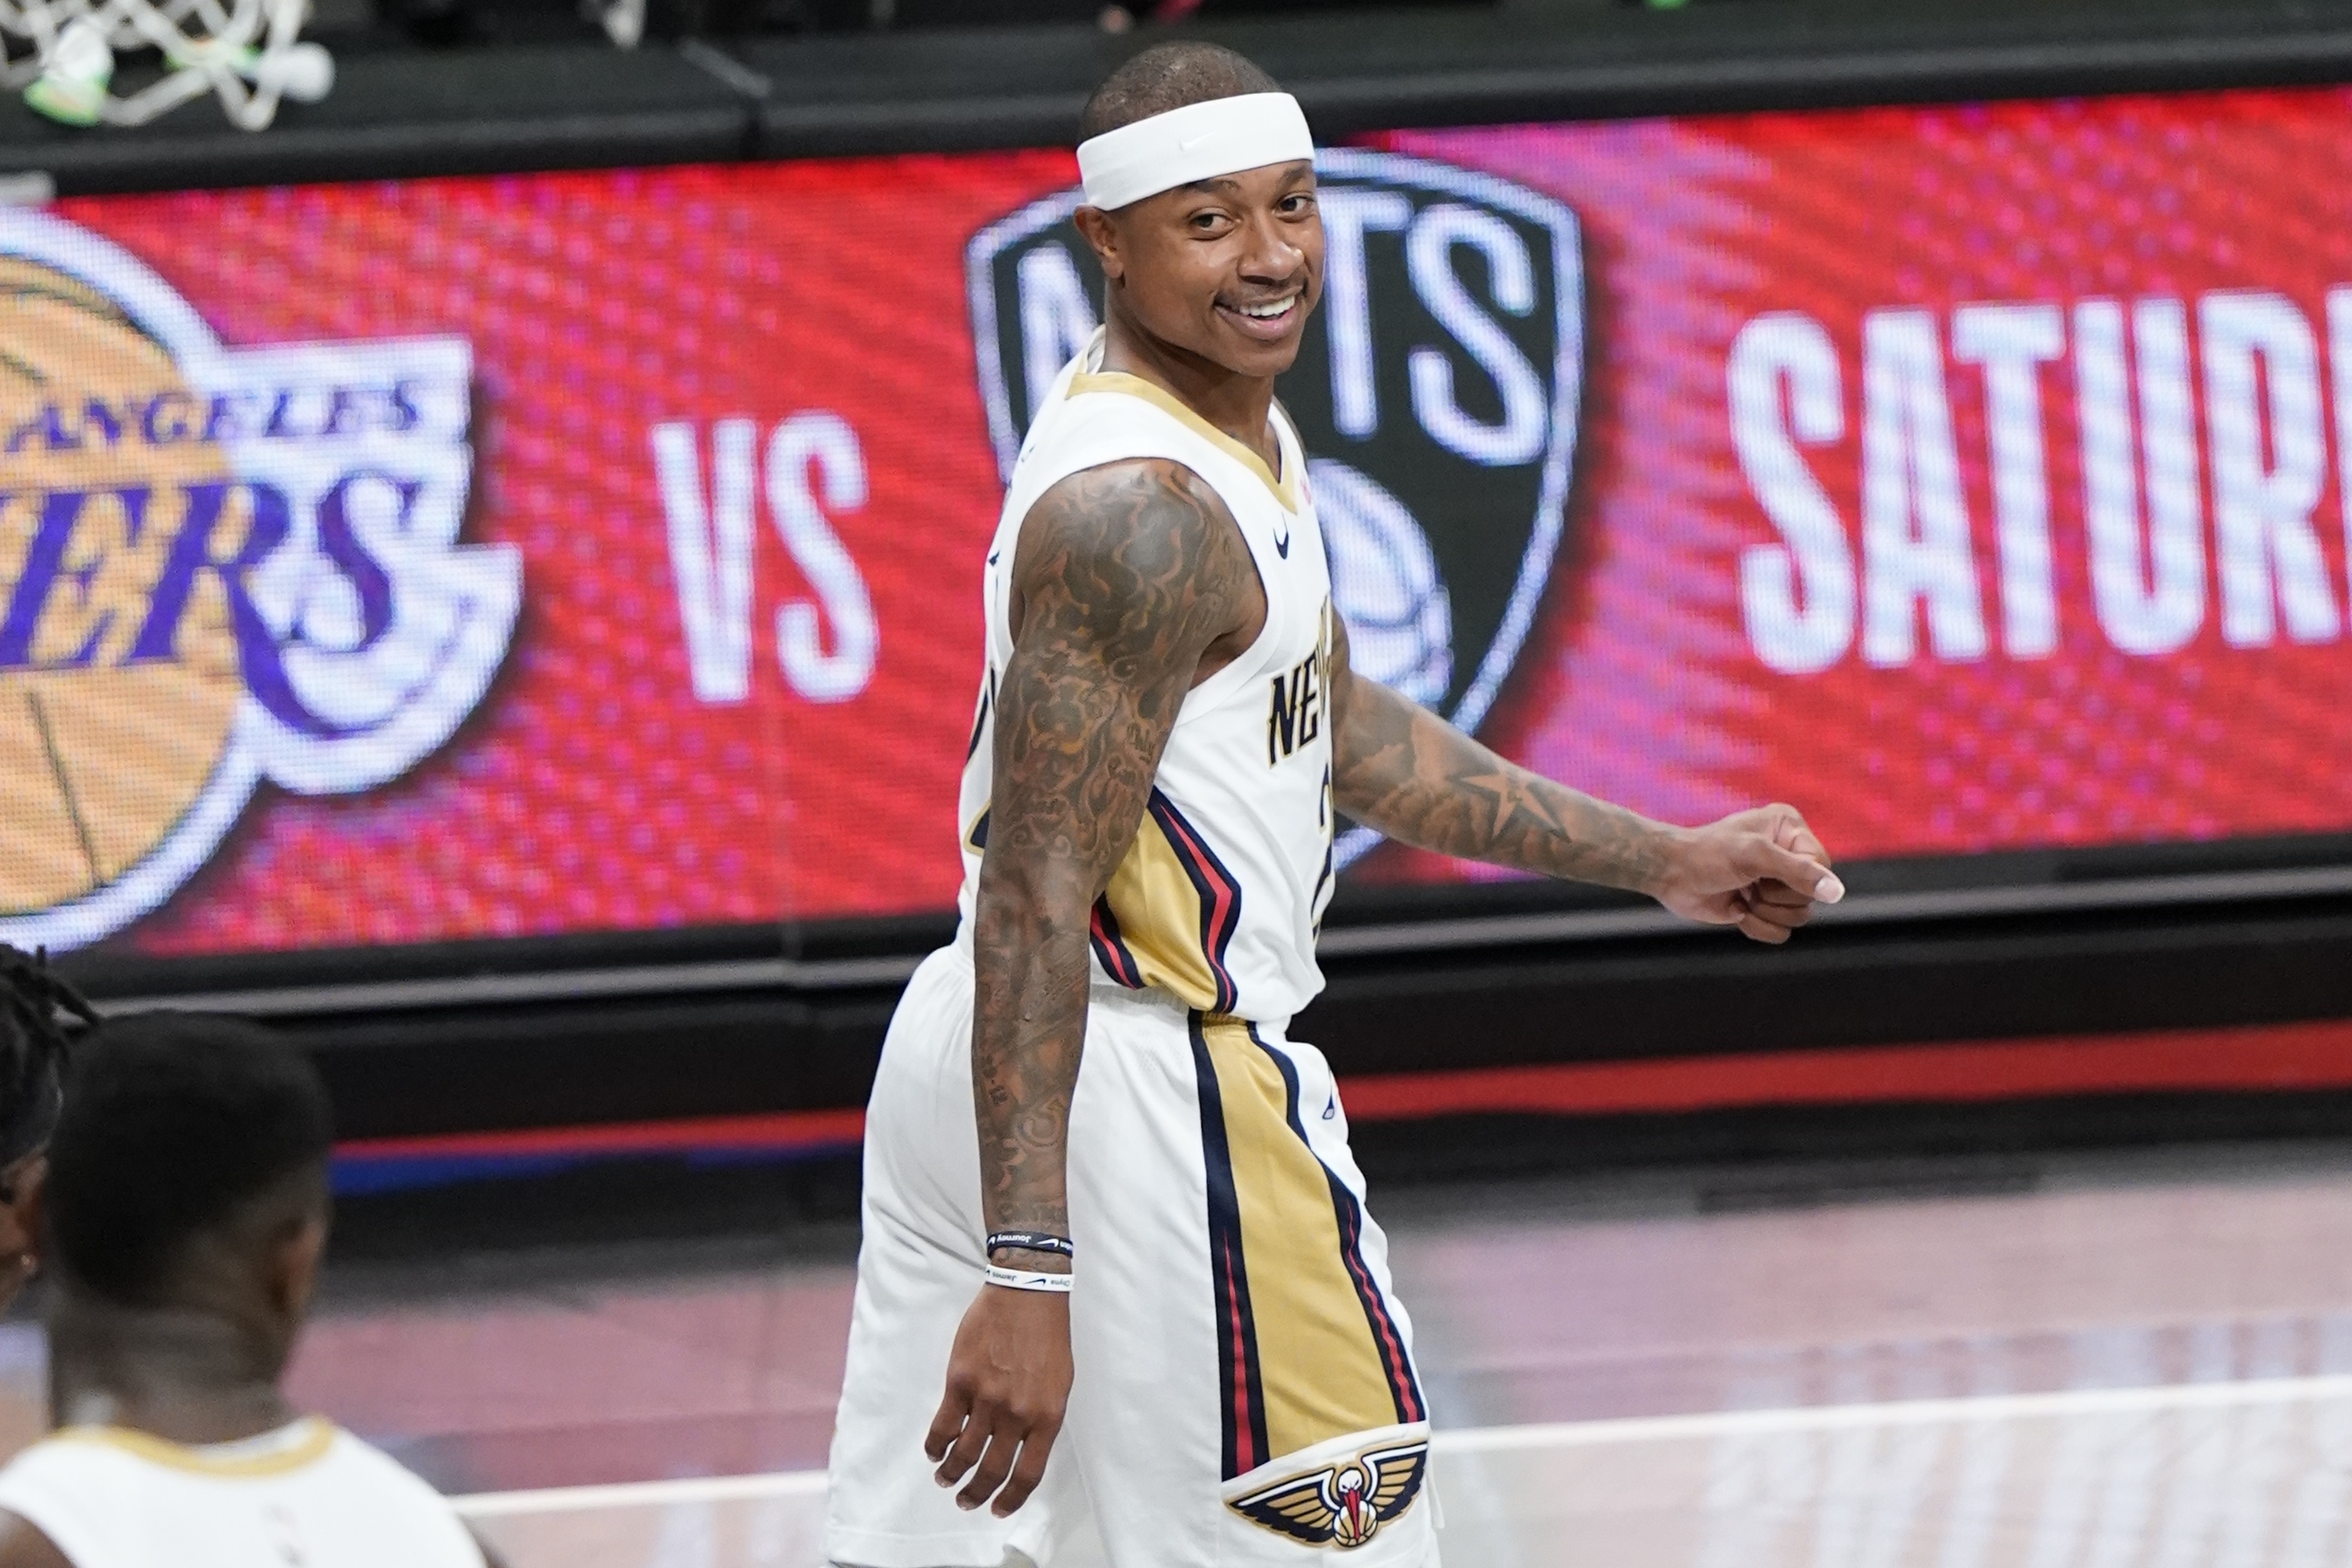 Isaiah Thomas is doing VIDEO GAME NUMBERS in the NBA G League right now 🎮